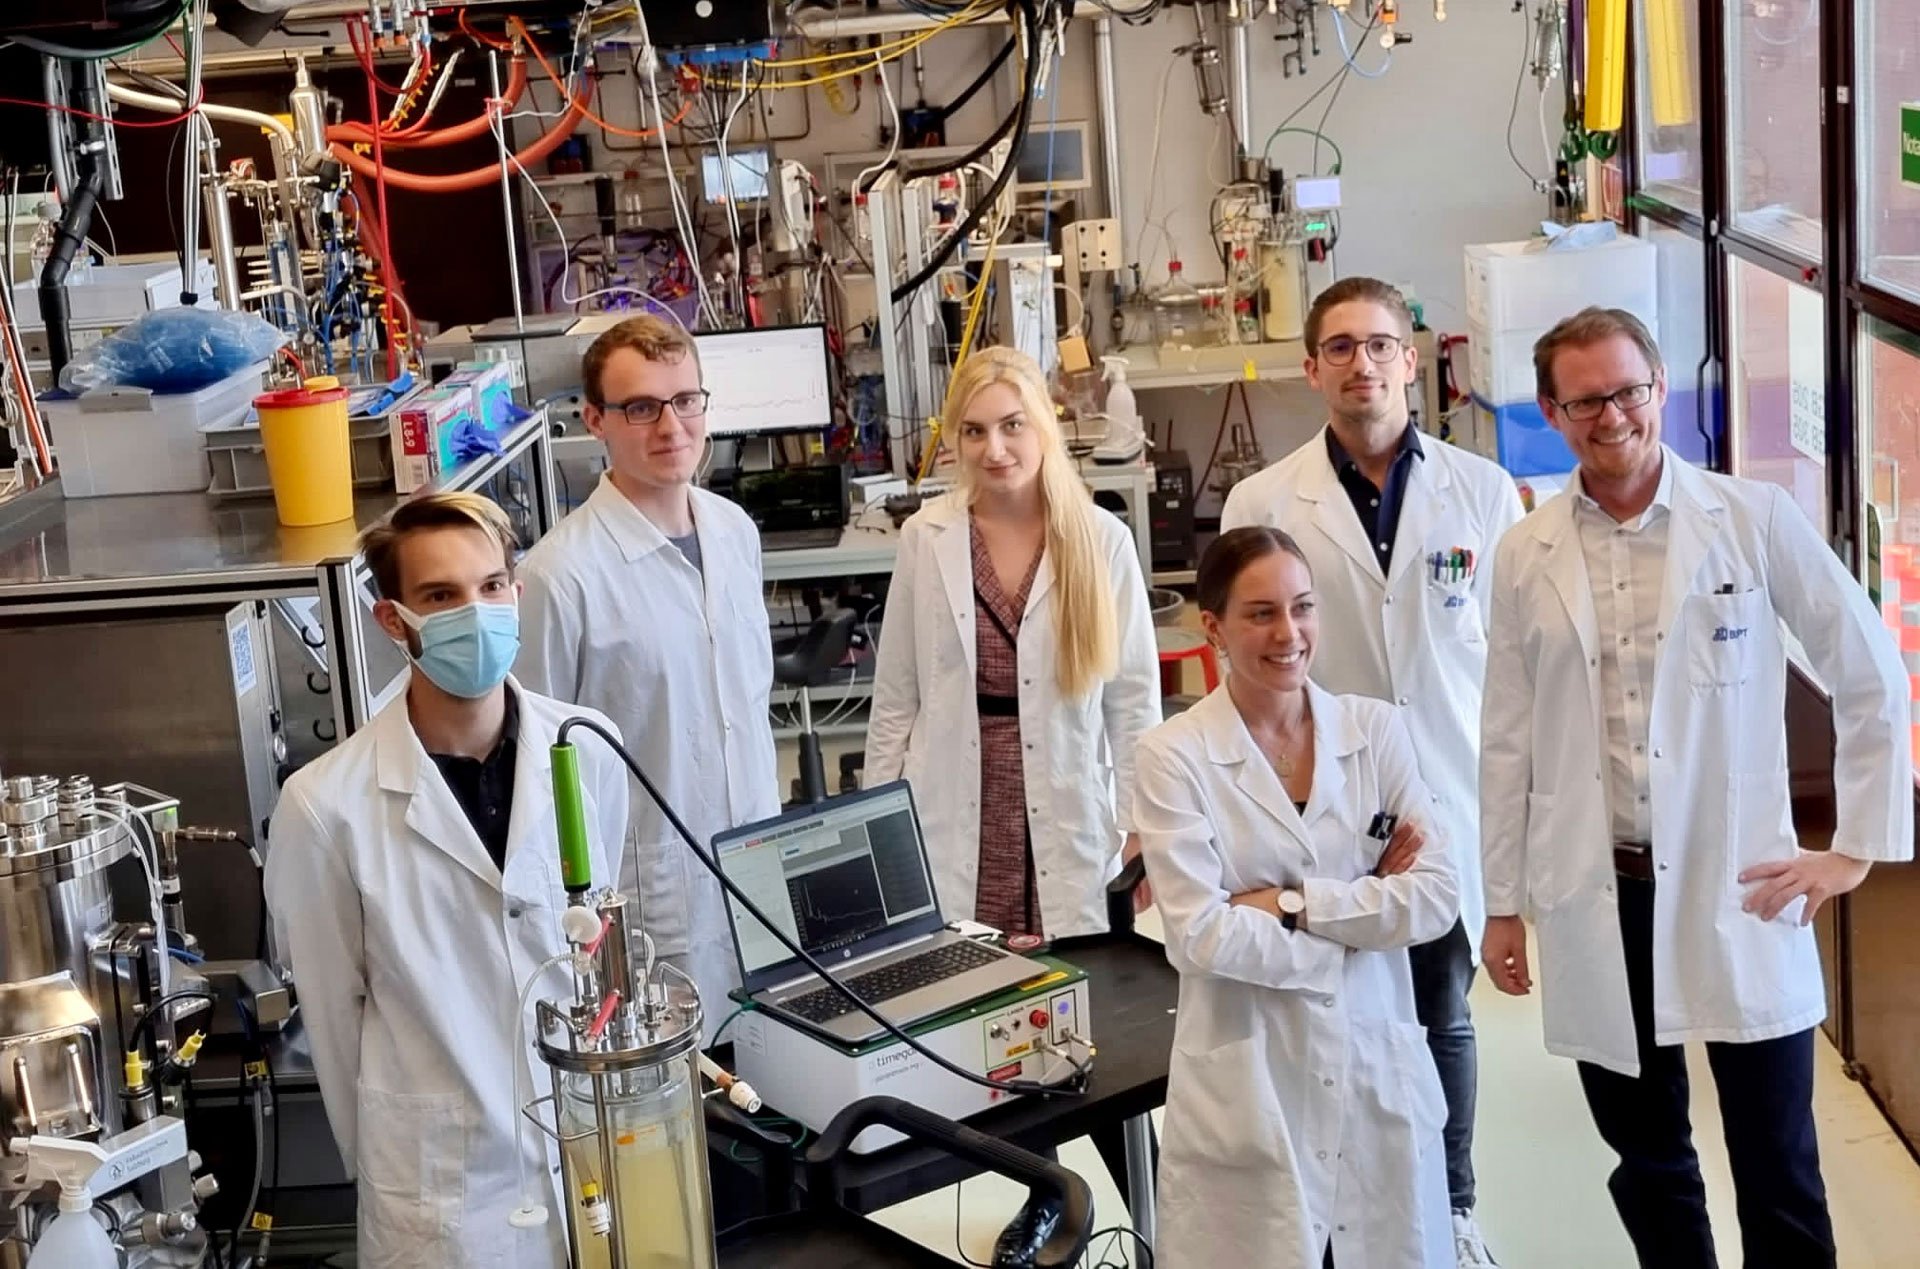 zhaw-team-pictured-with-picoramanm3-spectrometer